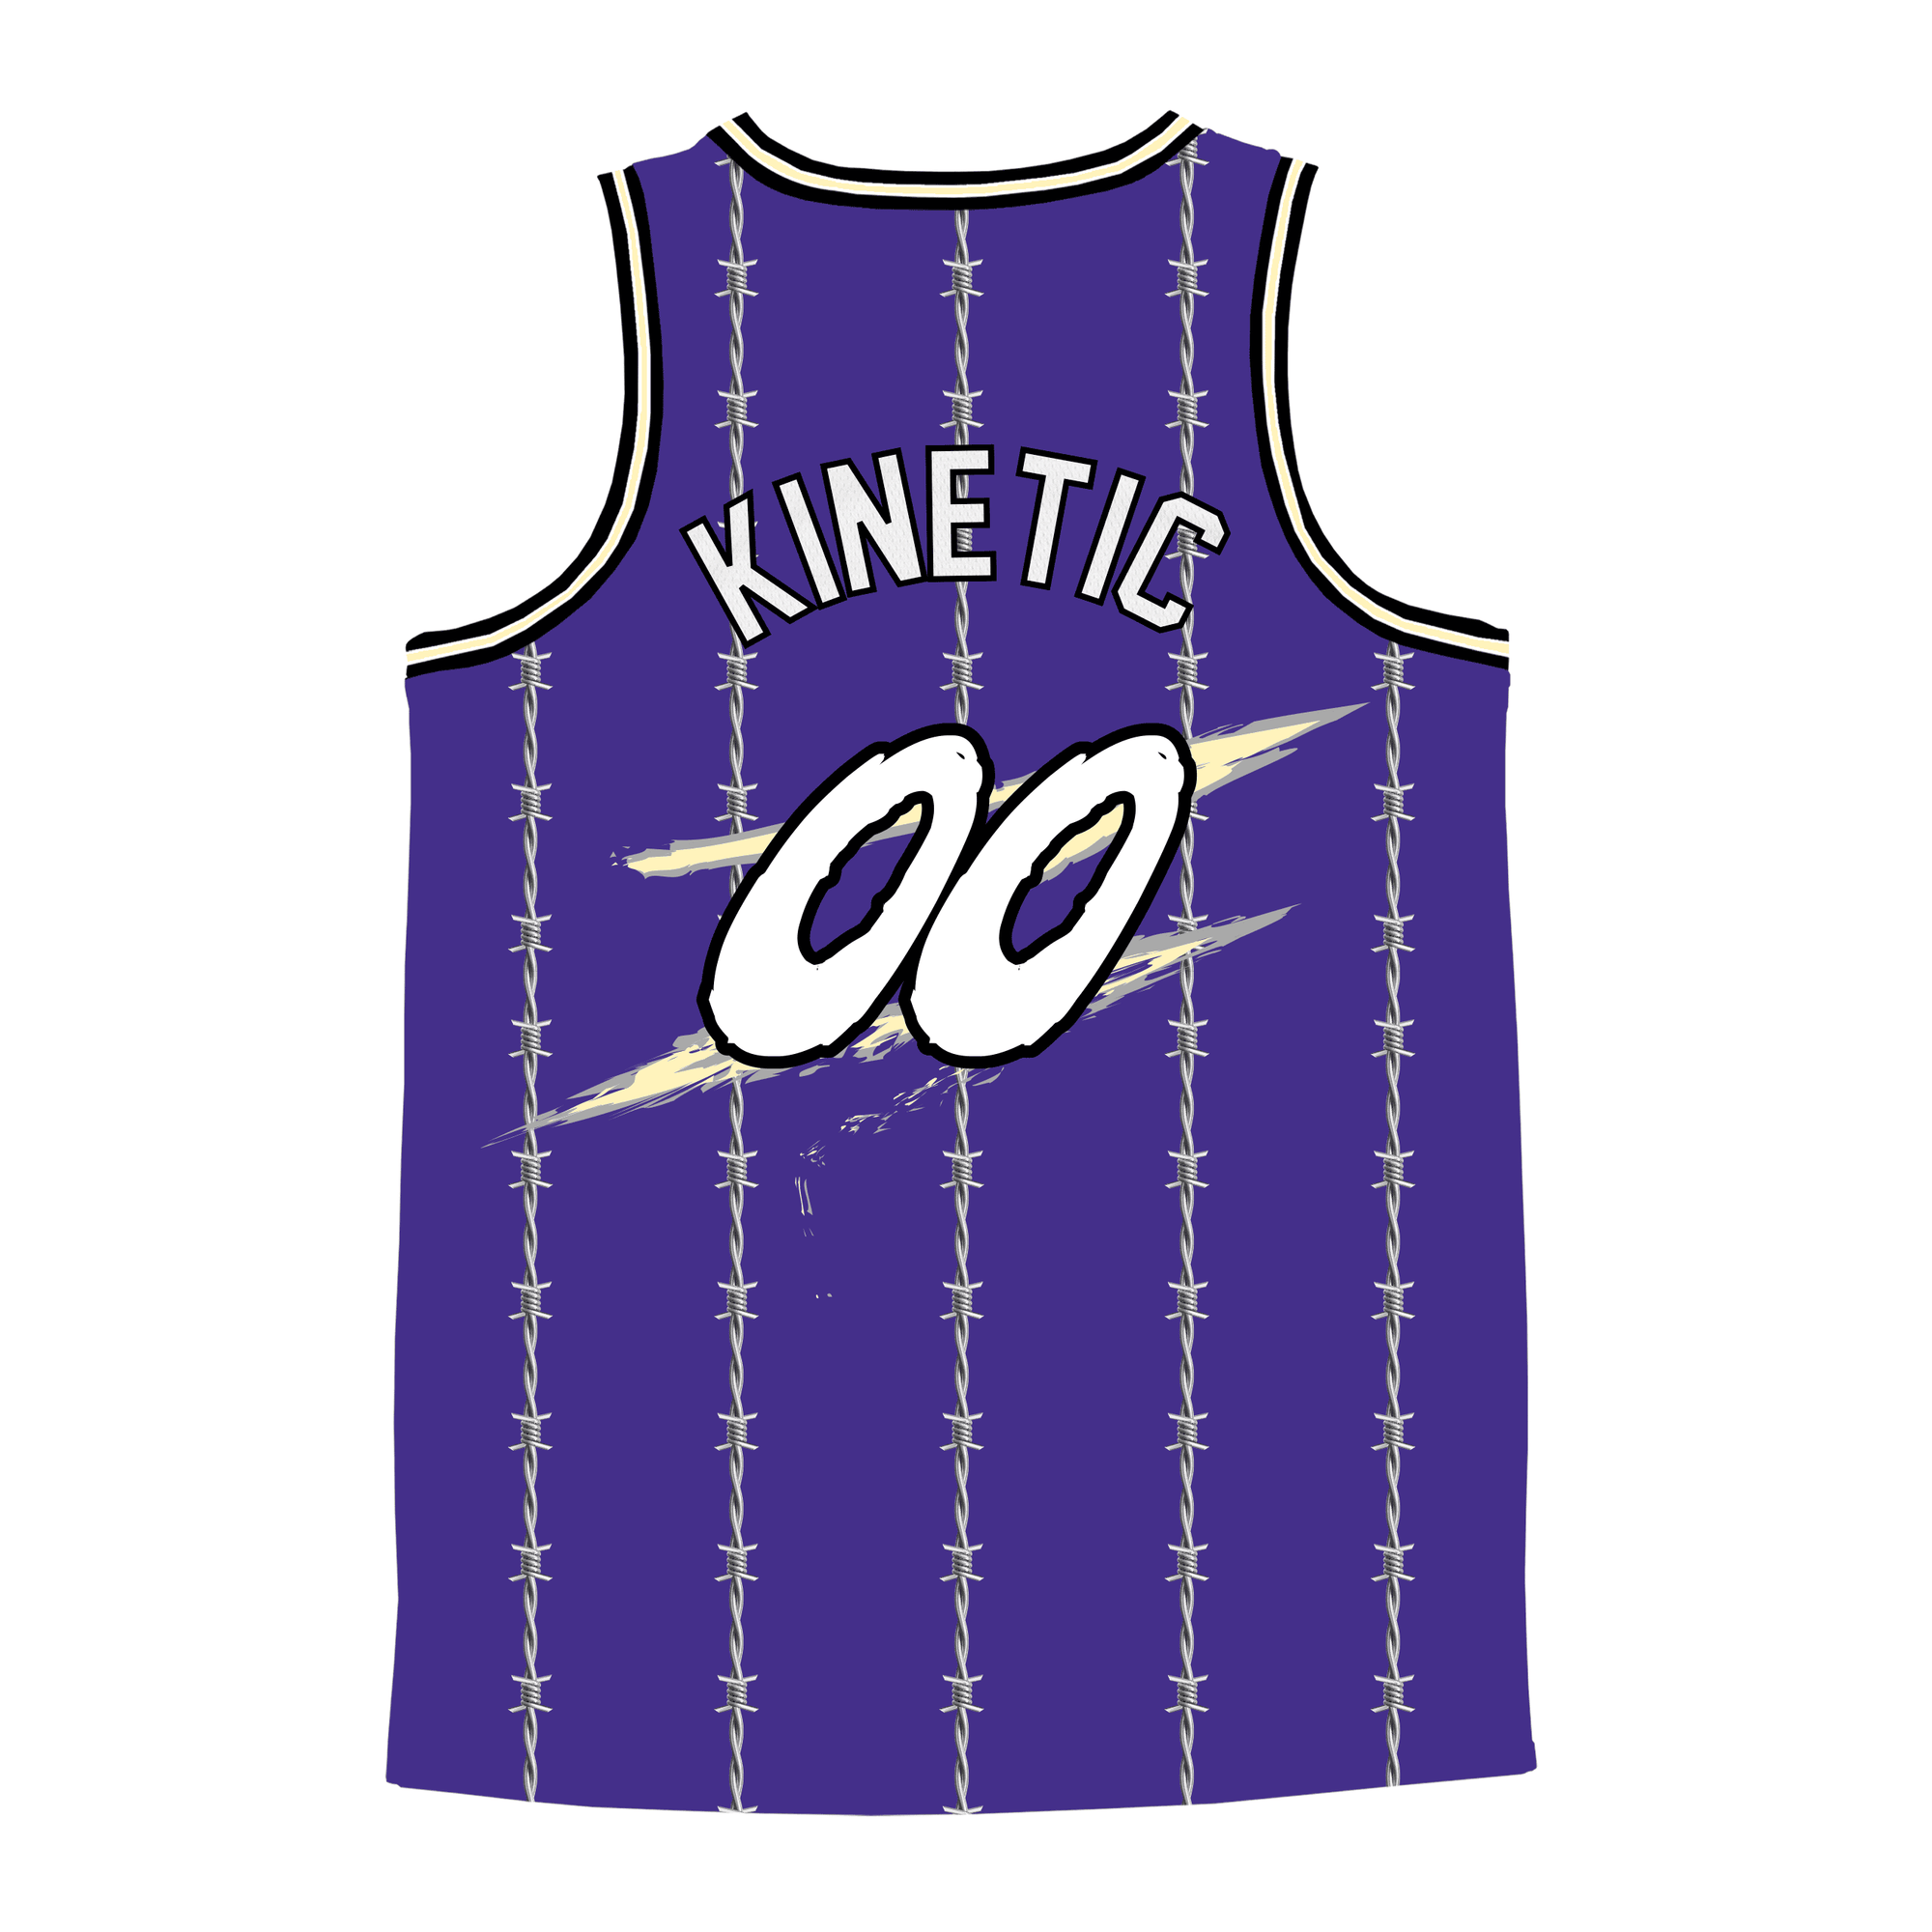 Sigma Nu - Barbed Wire Basketball Jersey